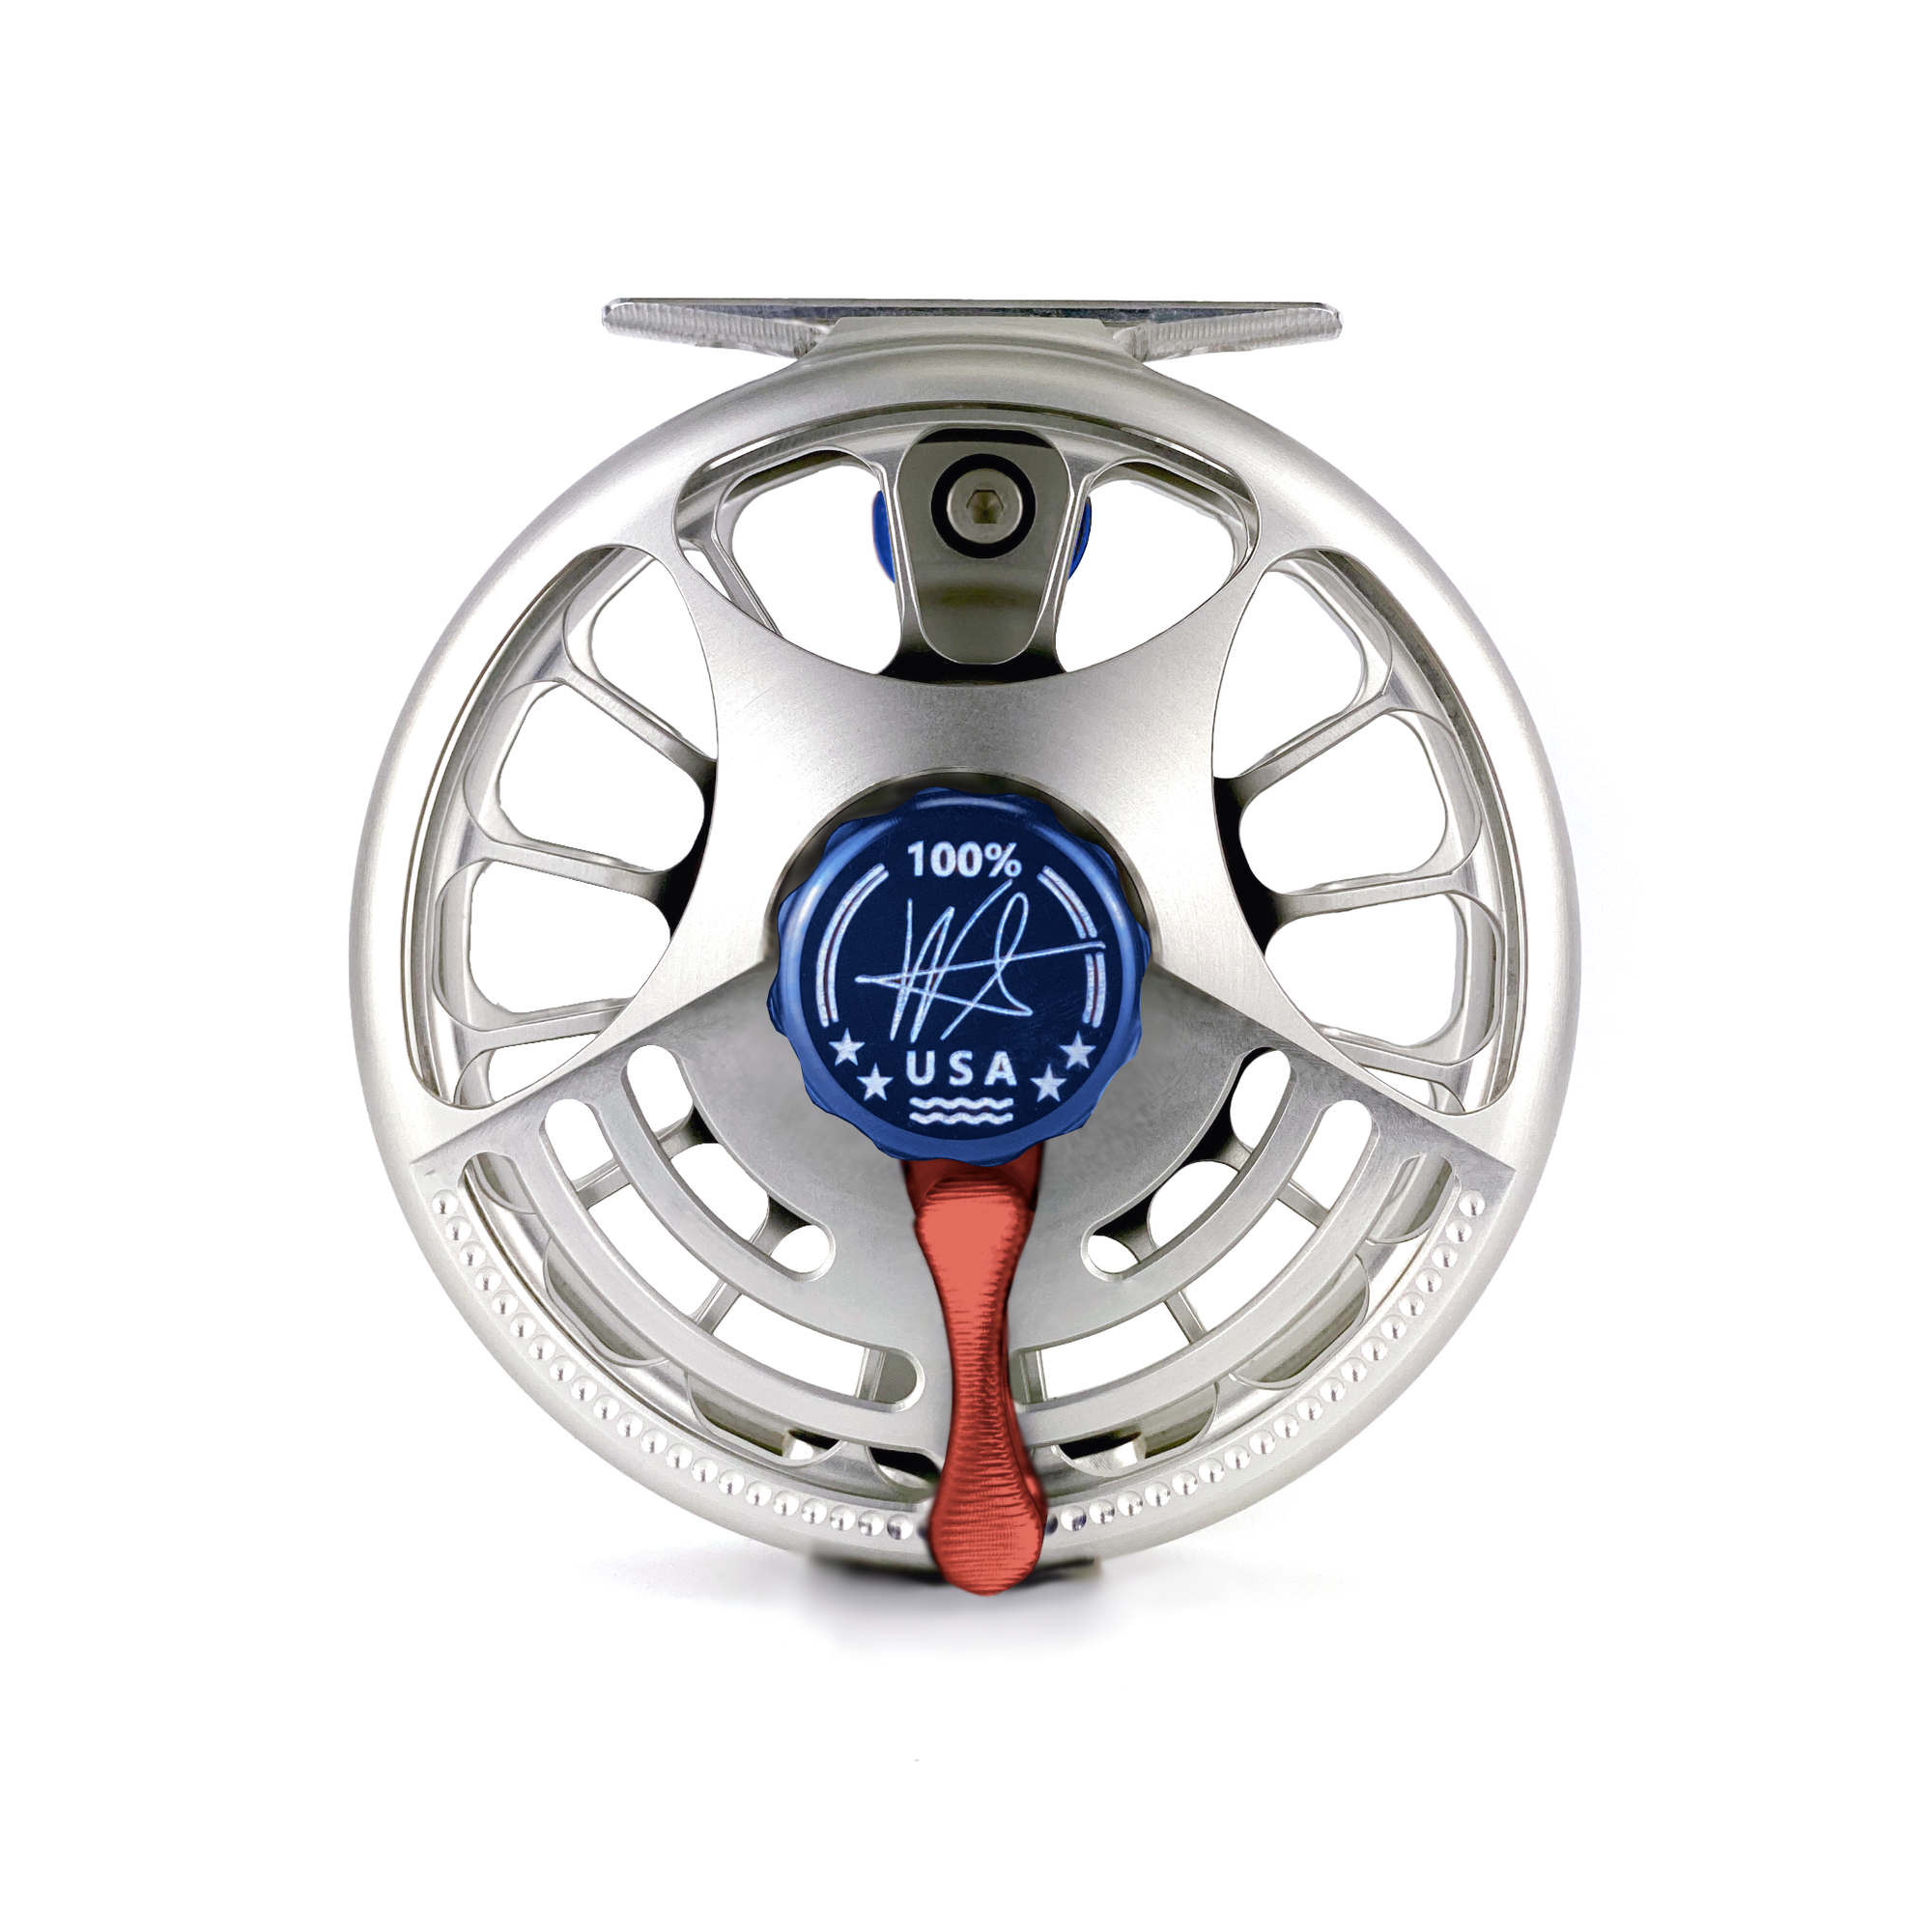 High-quality 6-9 weight fly fishing reel with a 4-inch diameter, featuring a slim design for efficient and smooth line retrieval.